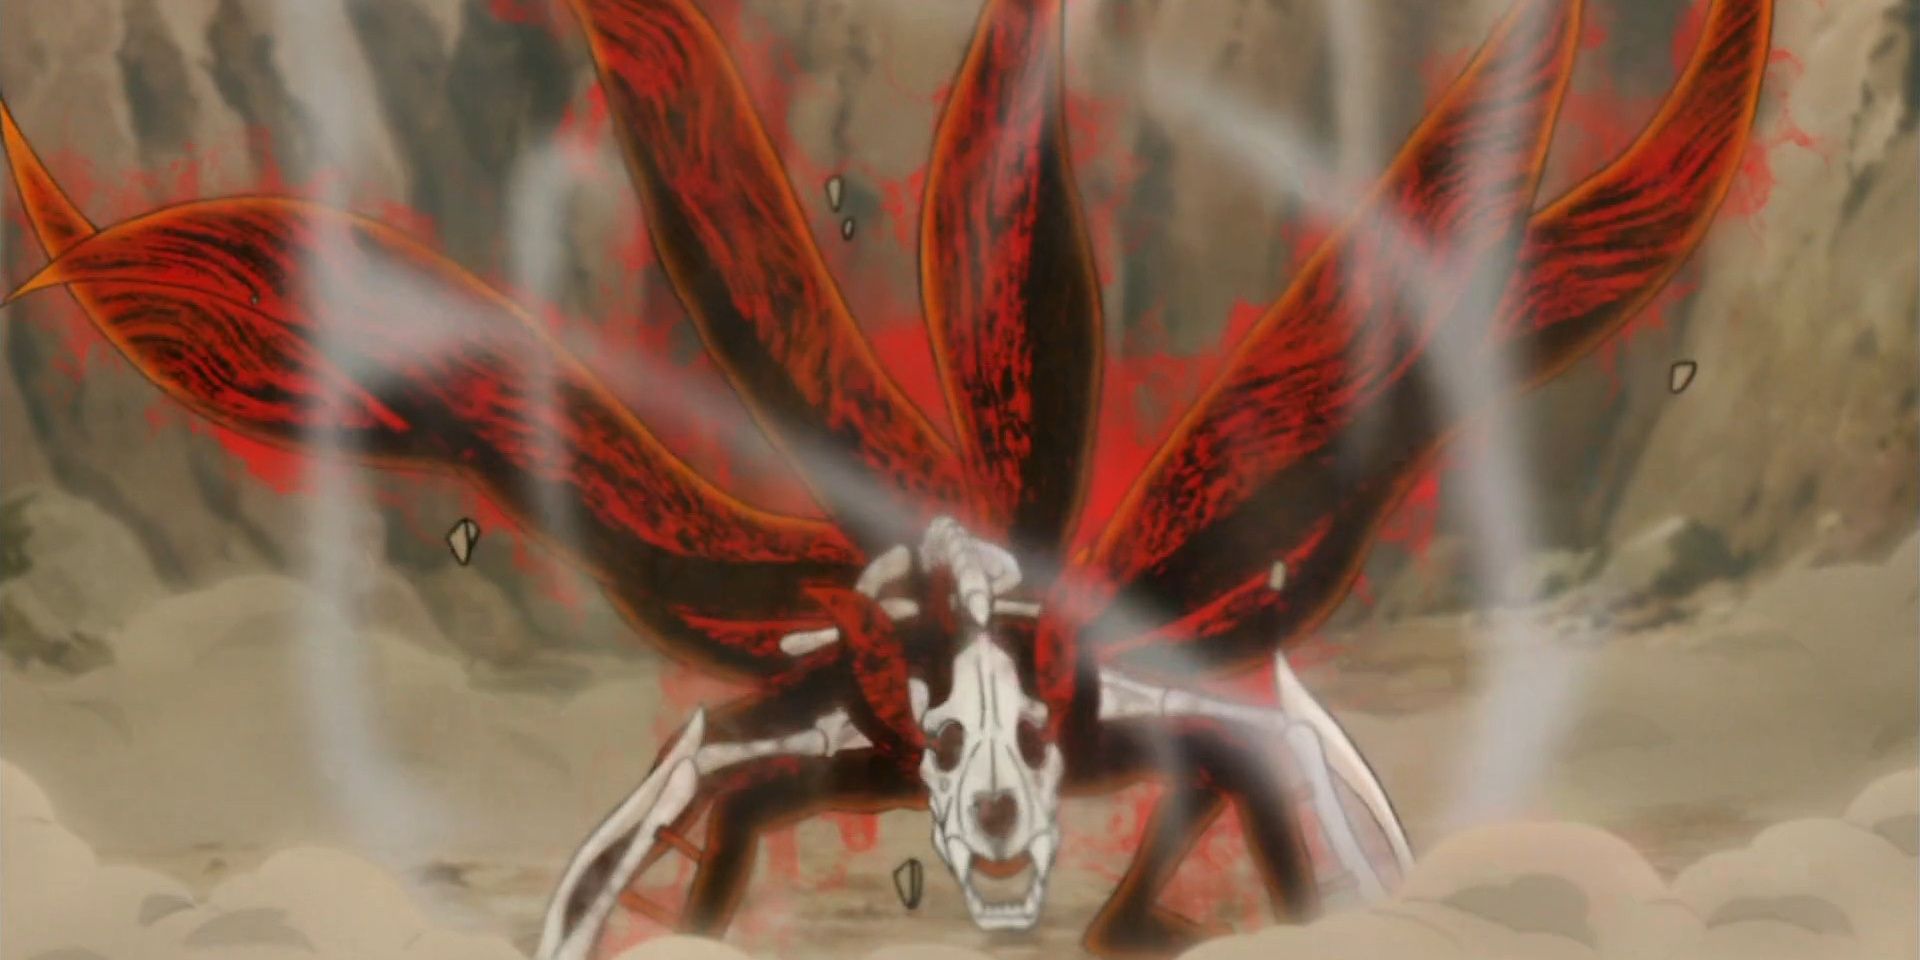 Naruto loses control and manifests four tails during his fight against Pain